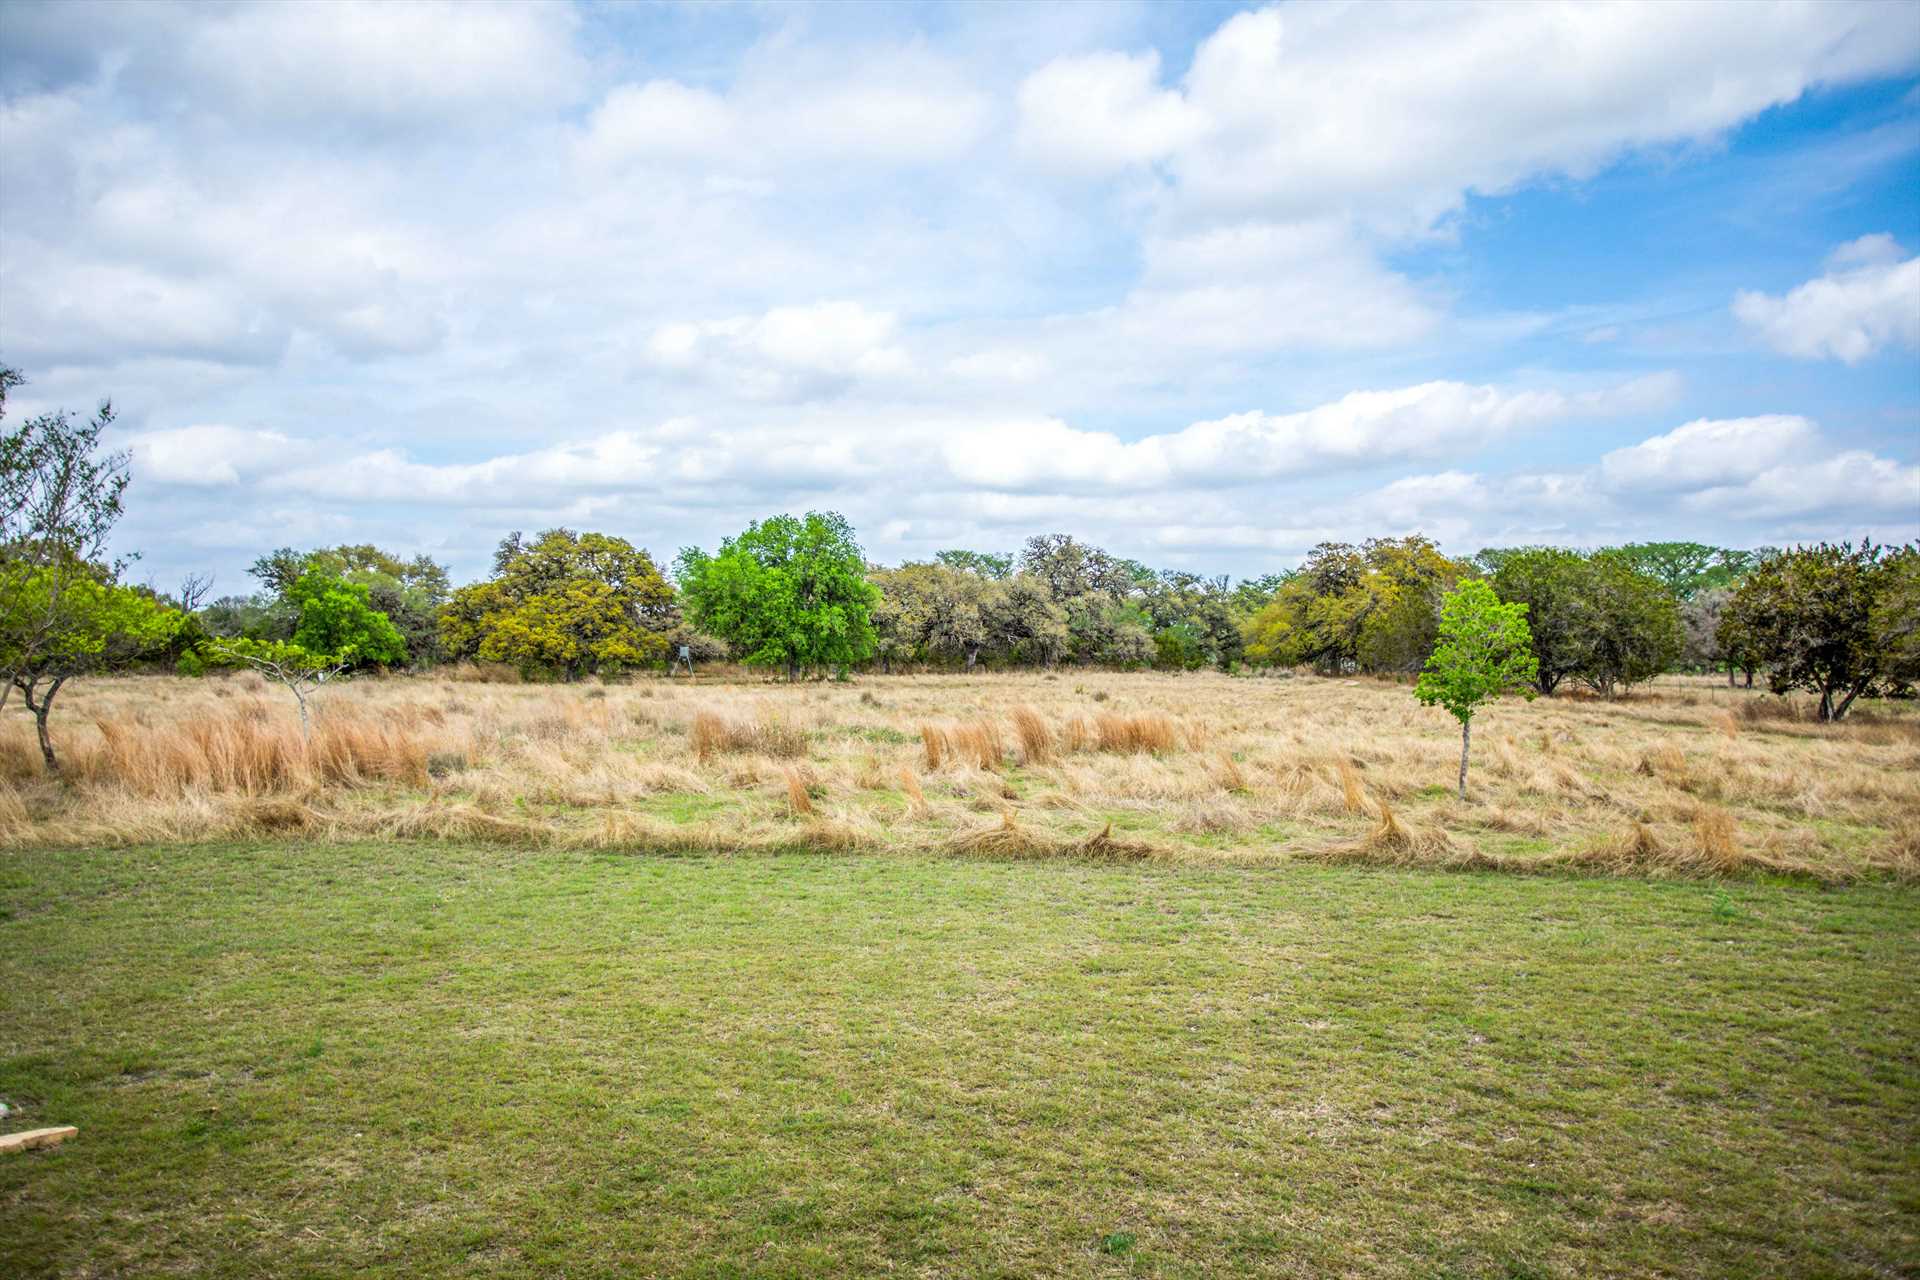                                                 Ten scenic acres of beautiful Hill Country land are yours to explore at the River Bend Hideaway!